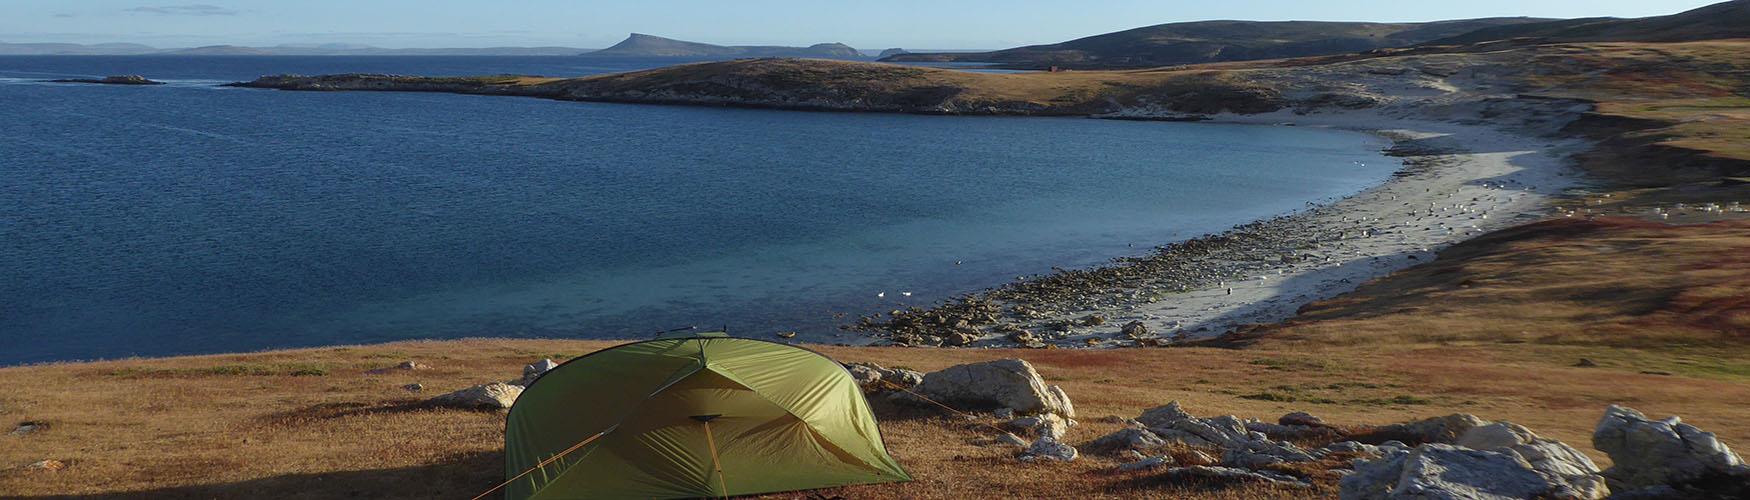 Camping in the Falkland Islands on a remote beach